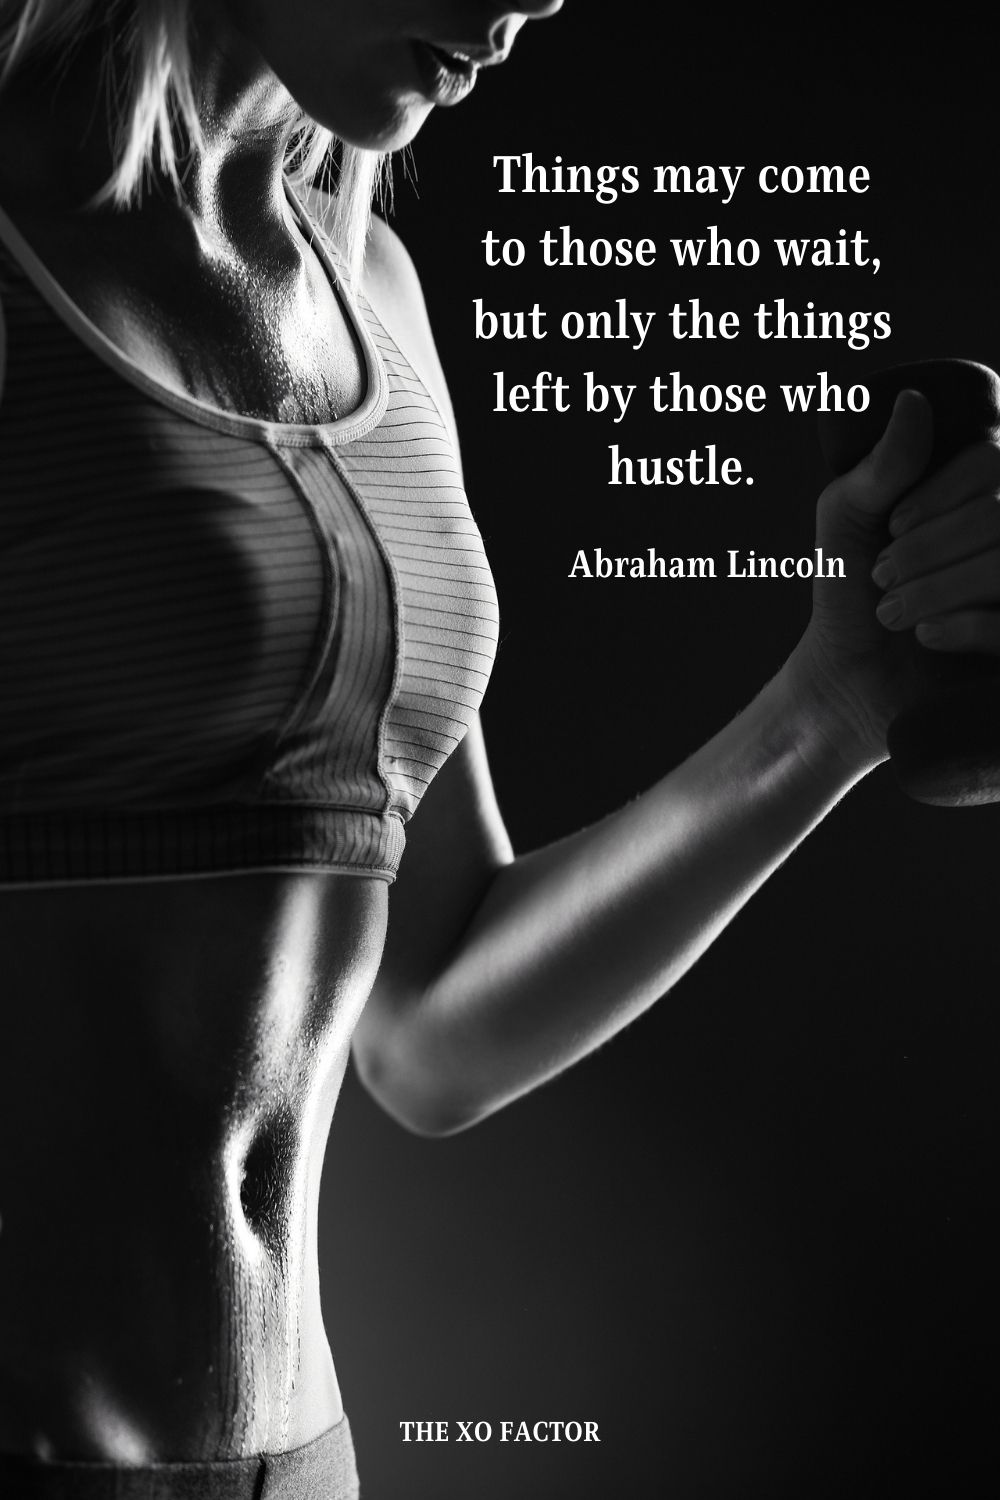 Things may come to those who wait, but only the things left by those who hustle. Abraham Lincoln